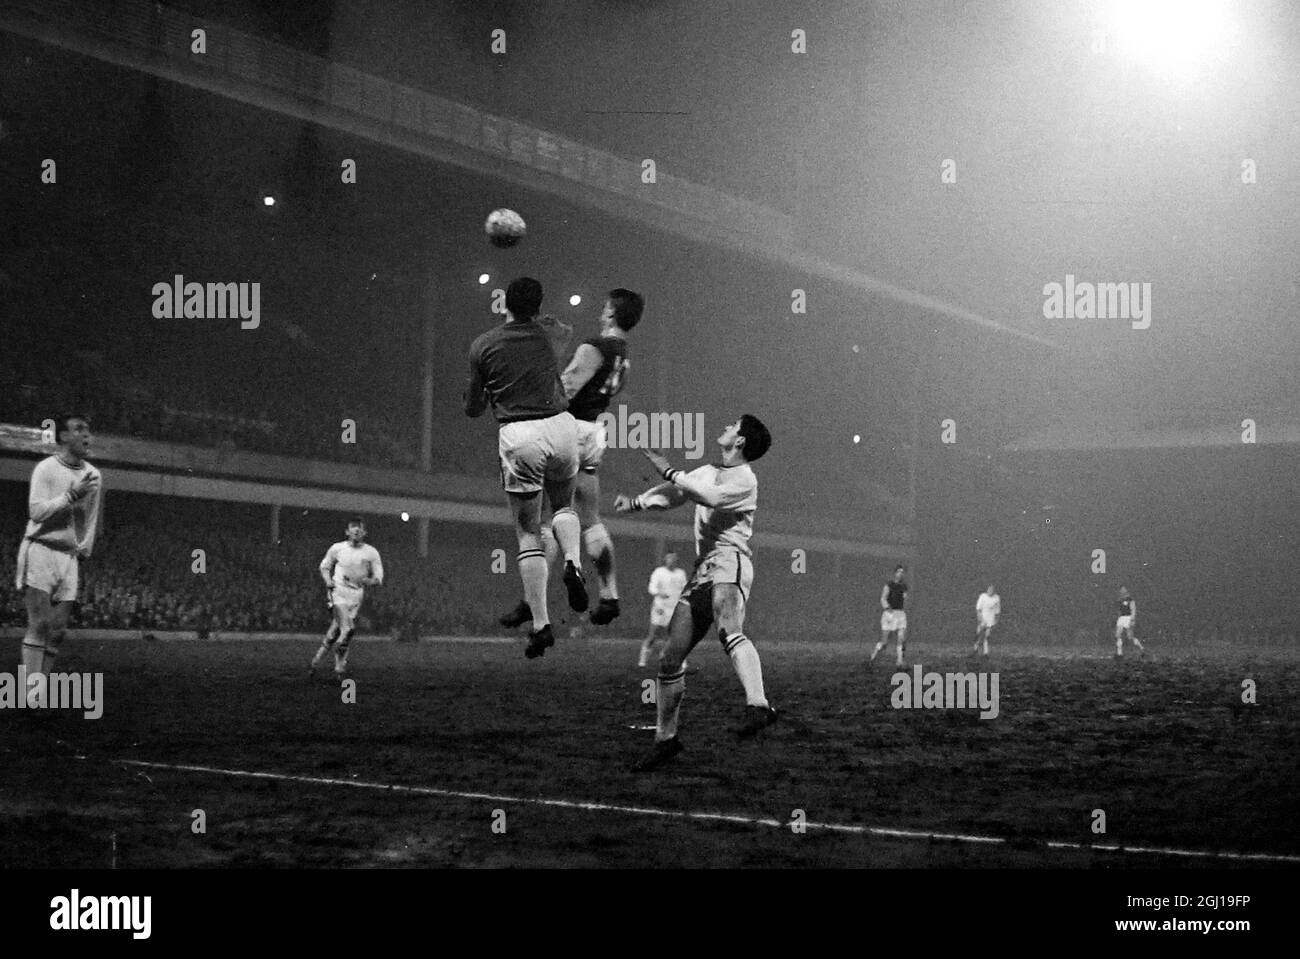 GORDON BANKS AND GEOFF HURST OF WEST HAM FOOTBALL CLUB IN ACTION - ; 23 MARCH 1964 Stock Photo